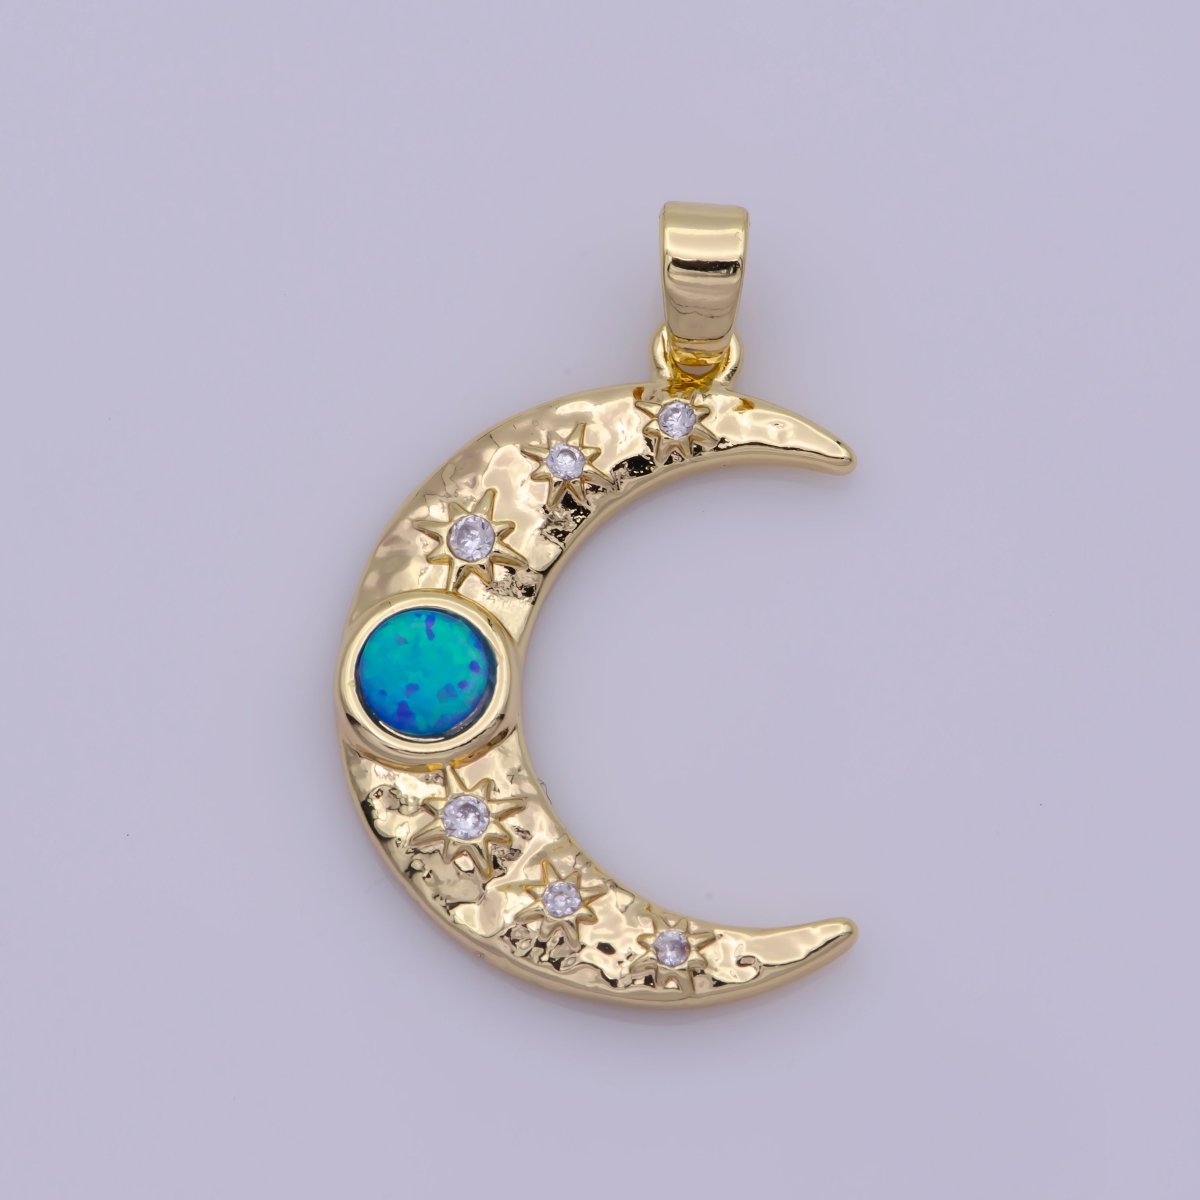 Dainty Moon Pendant Gold Moon with Opal Stone Pendant Necklace, Celestial Jewelry Opal Stone Necklace Star Charm N-493 N-494 - DLUXCA